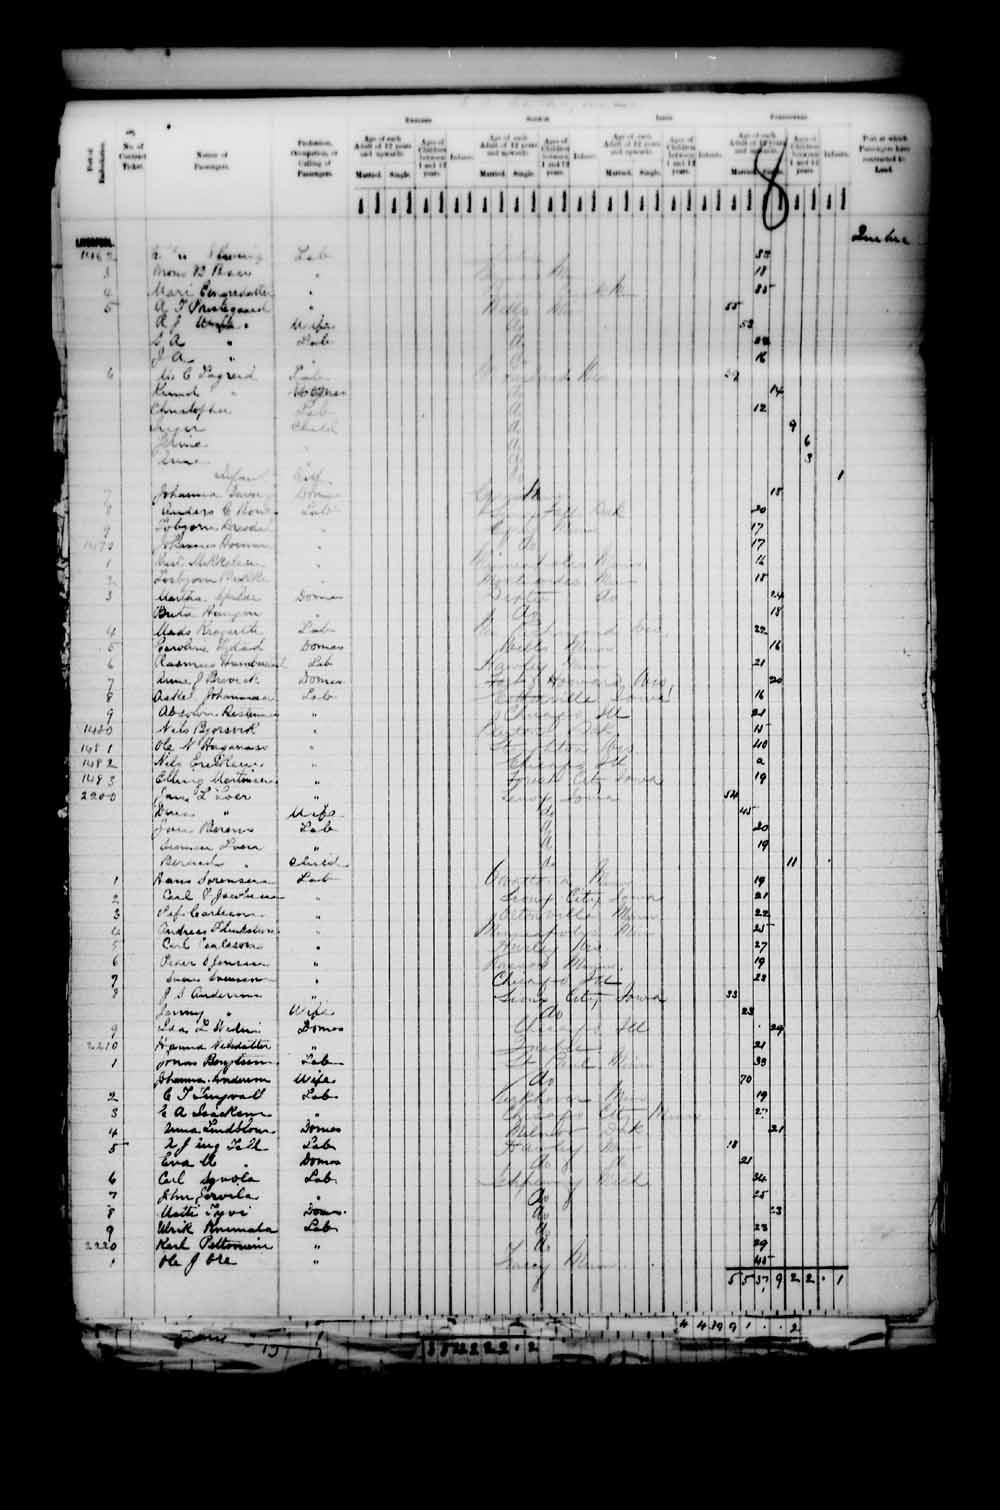 Digitized page of Quebec Passenger Lists for Image No.: e003546737